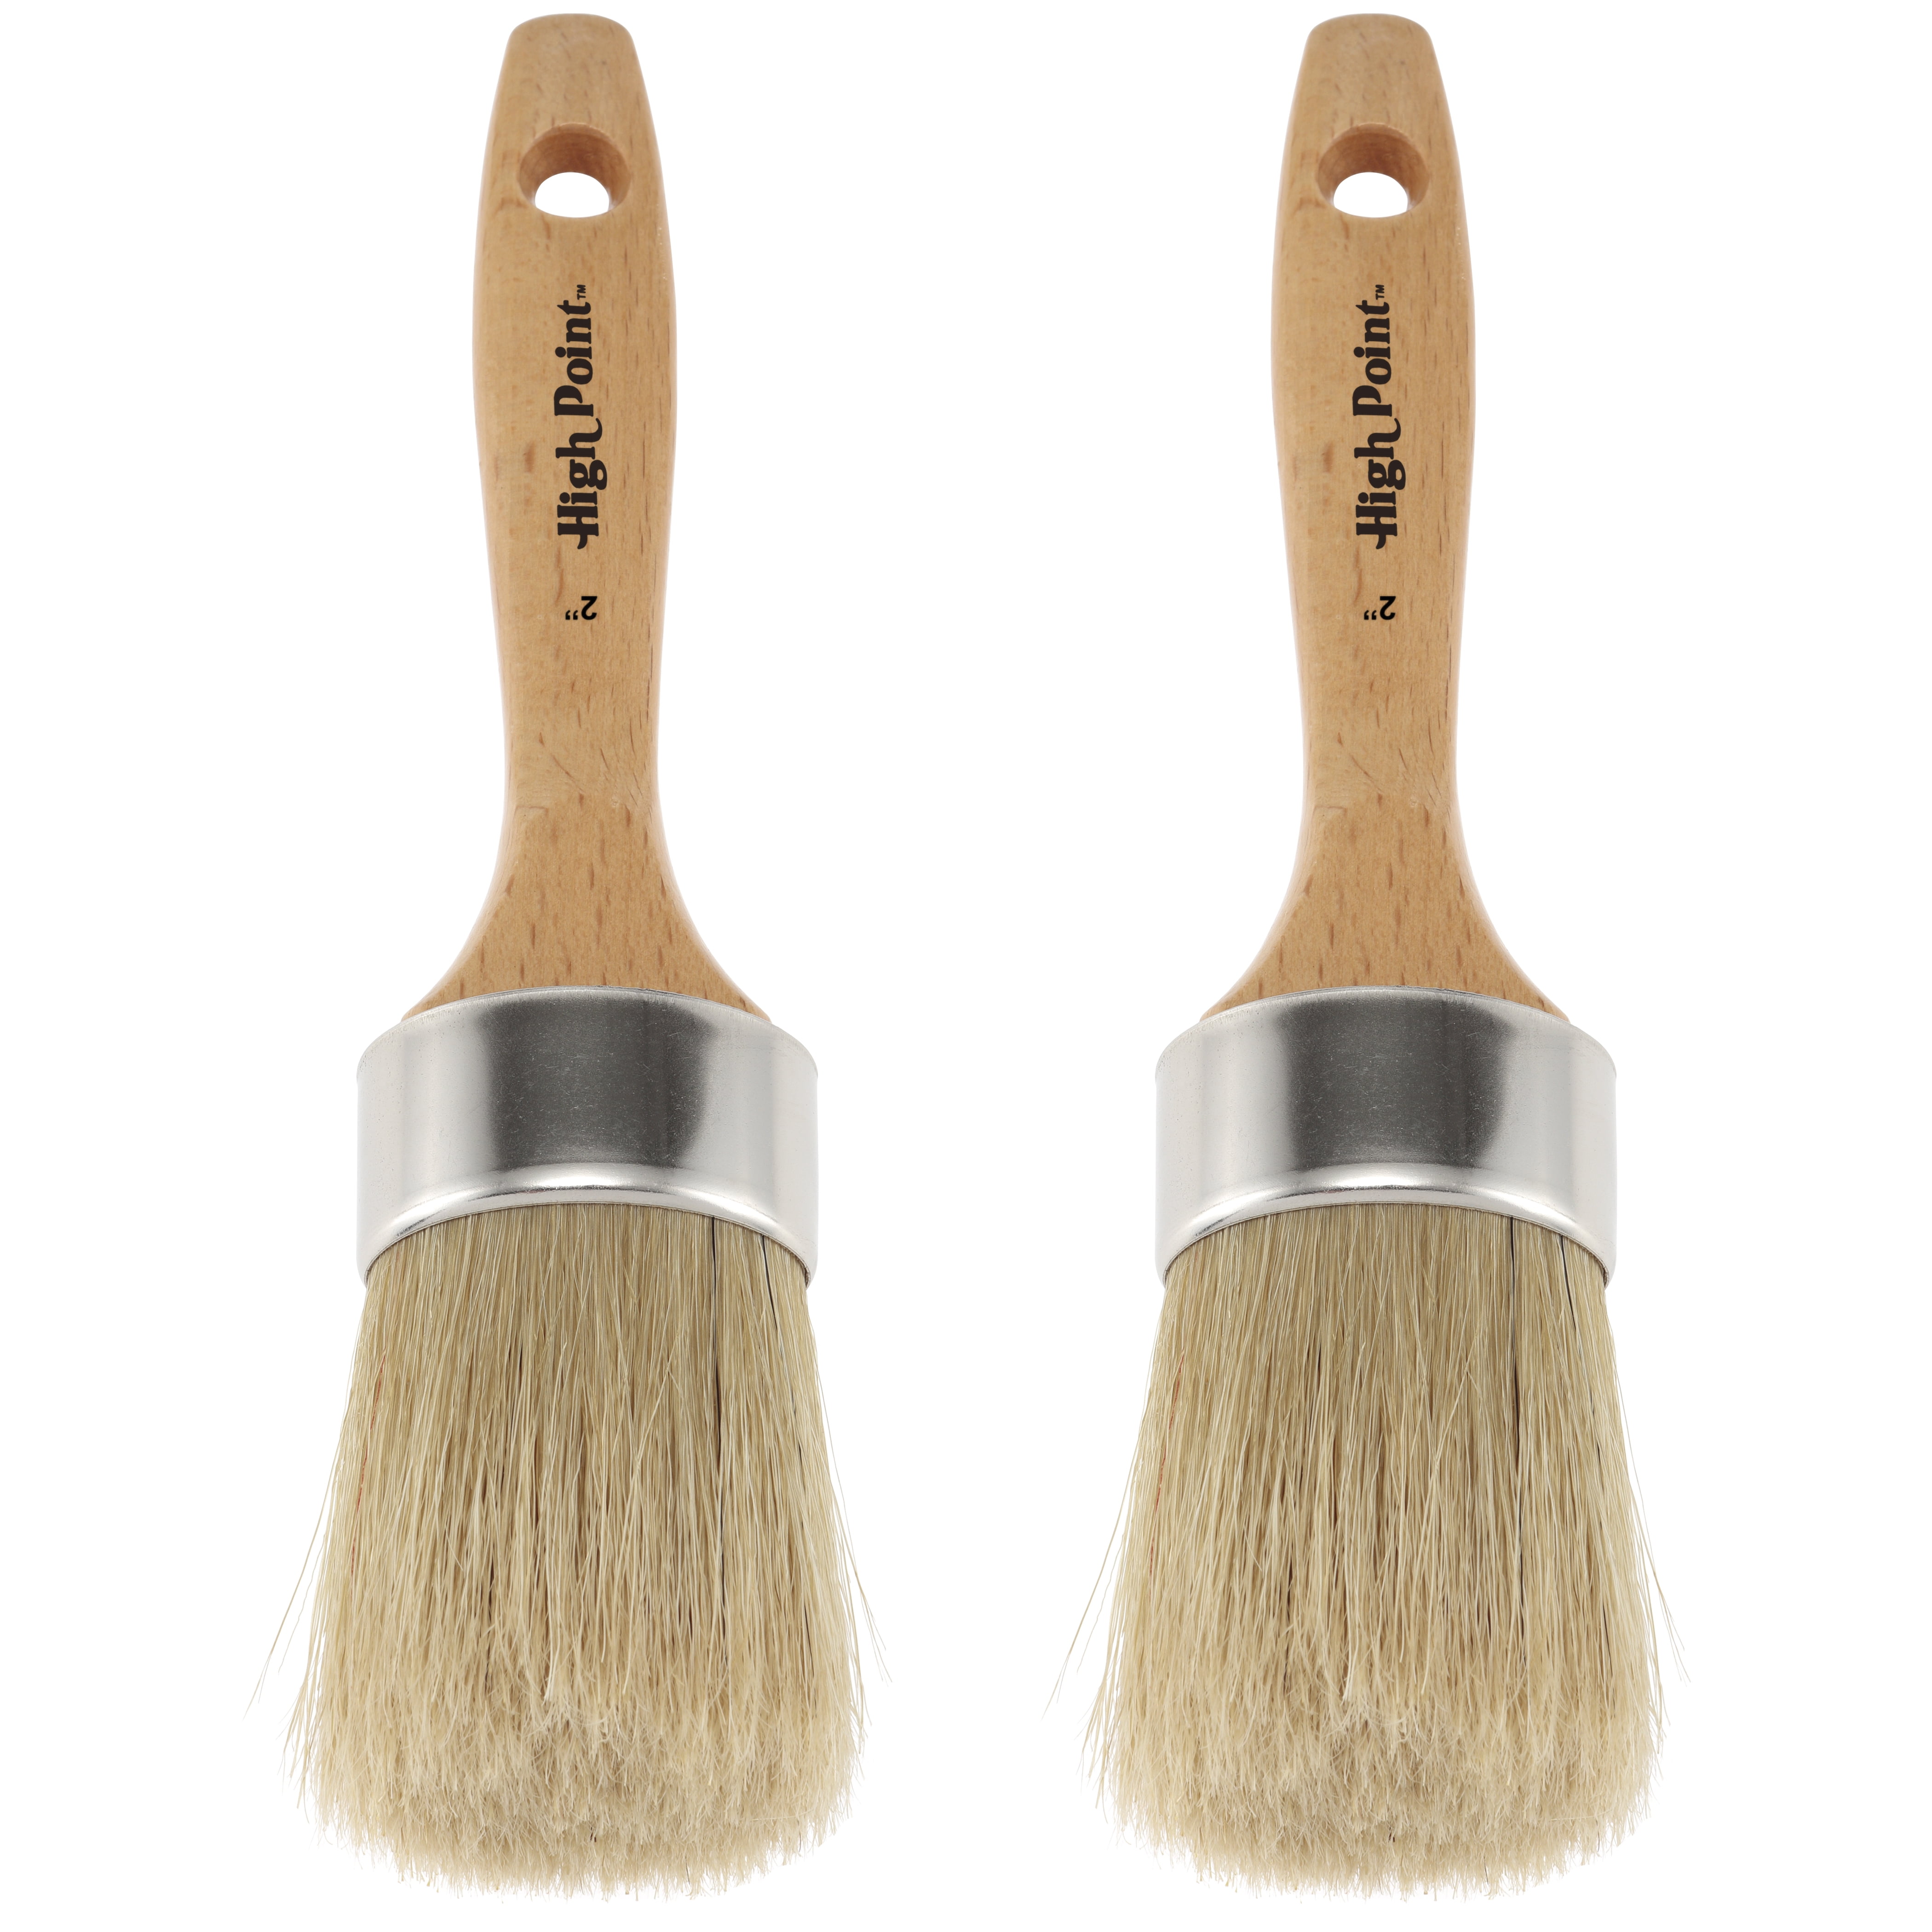 2-inch Wistoba Round Paint Brush - Made in Germany - Professional Quality